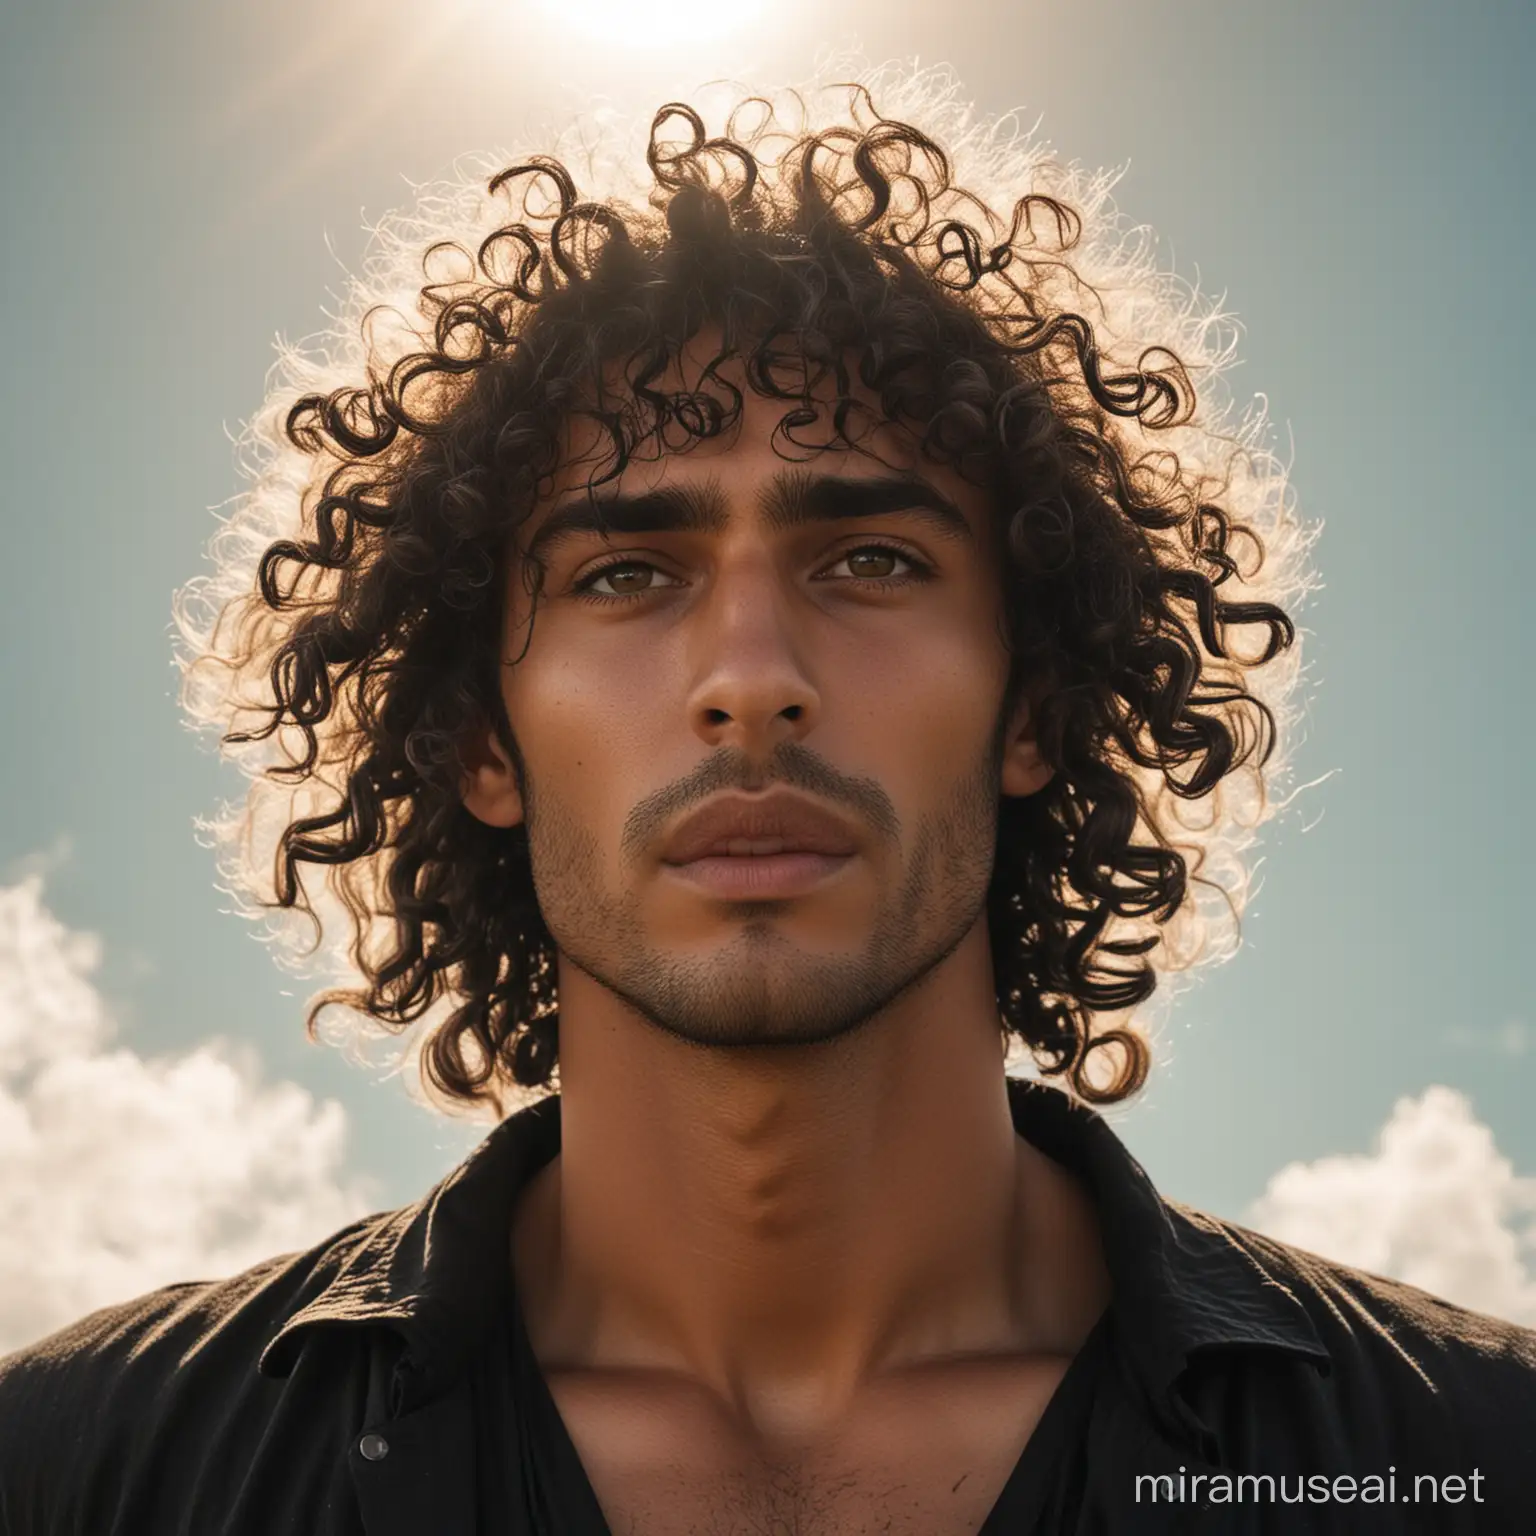 A tall gothic man with curly hair, tanned skin and an intense gaze reaching out to the sun 